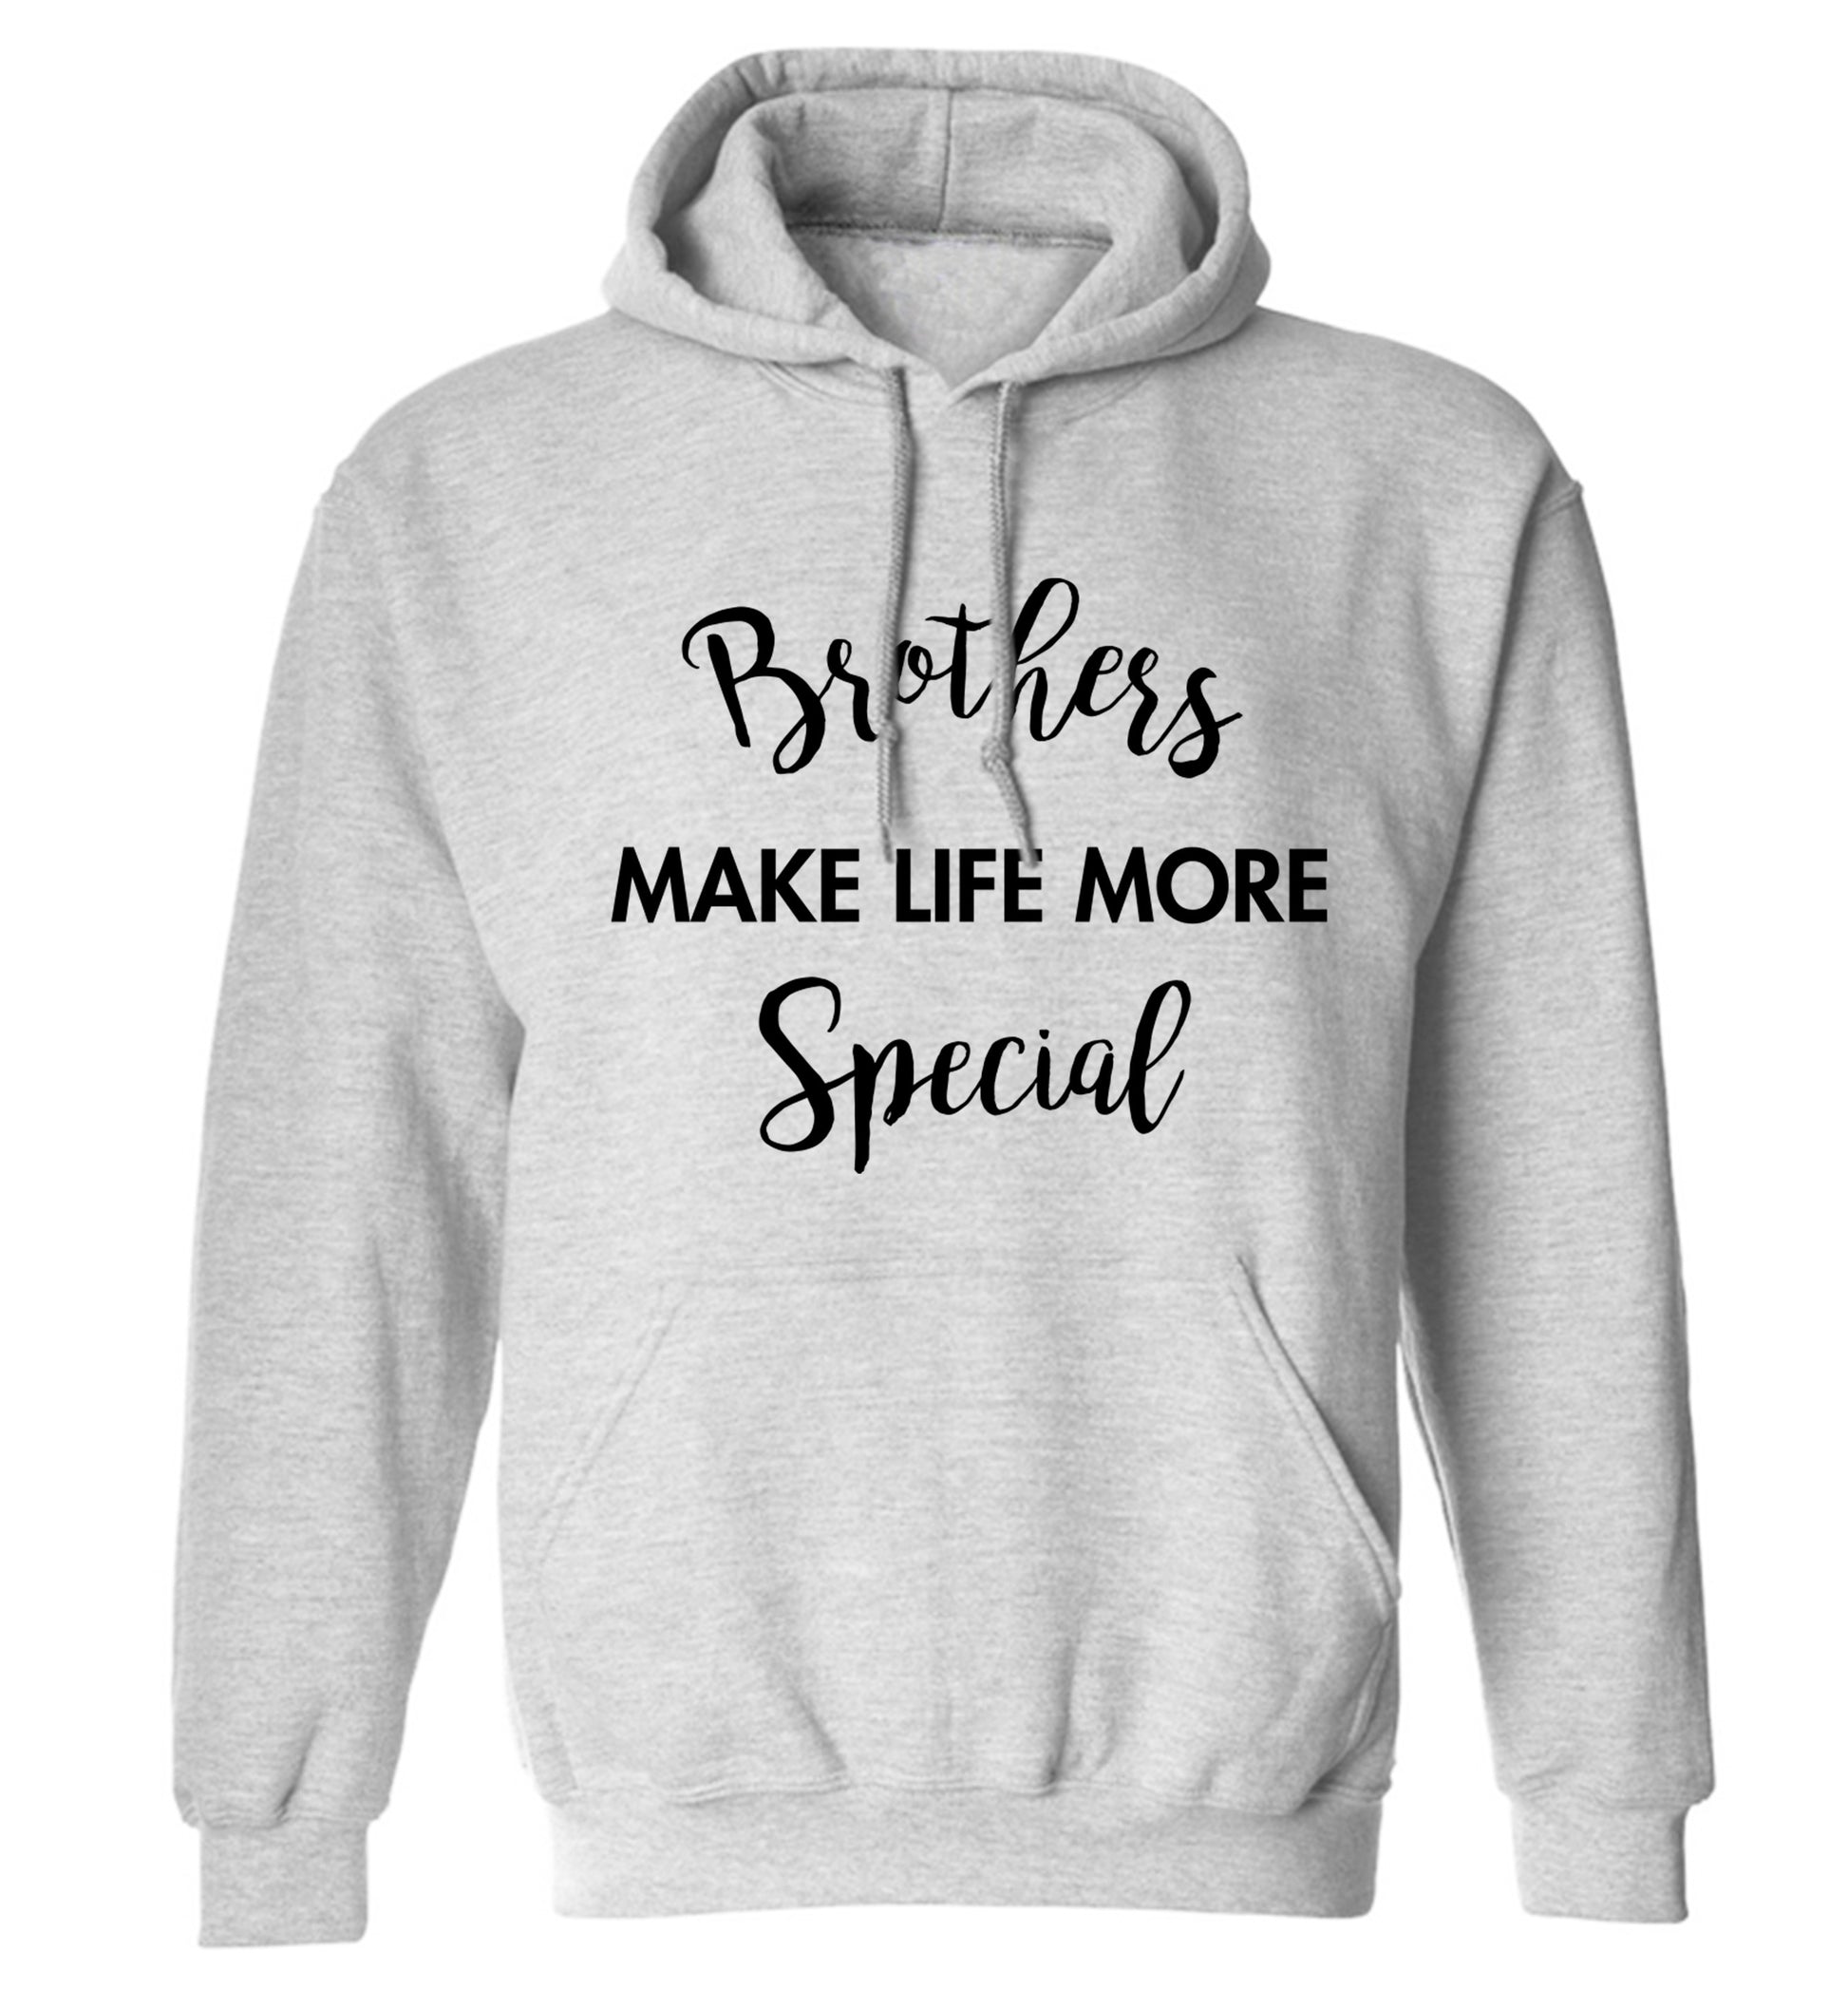 Brothers make life more special adults unisex grey hoodie 2XL